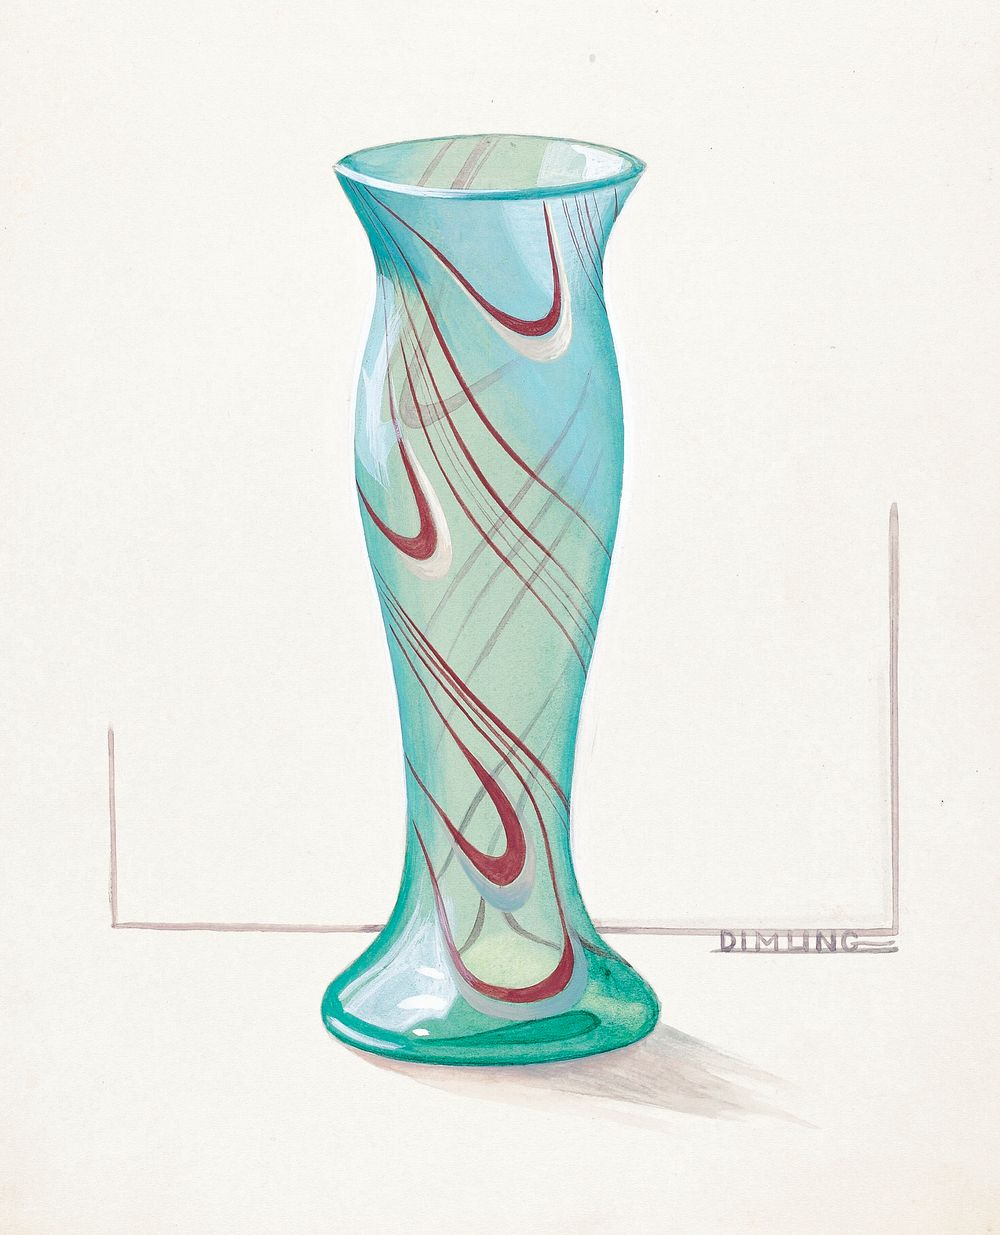 Vase (Green with Red Swirl (ca.1937) by Elizabeth Dimling. Original from The National Gallery of Art. Digitally enhanced by…